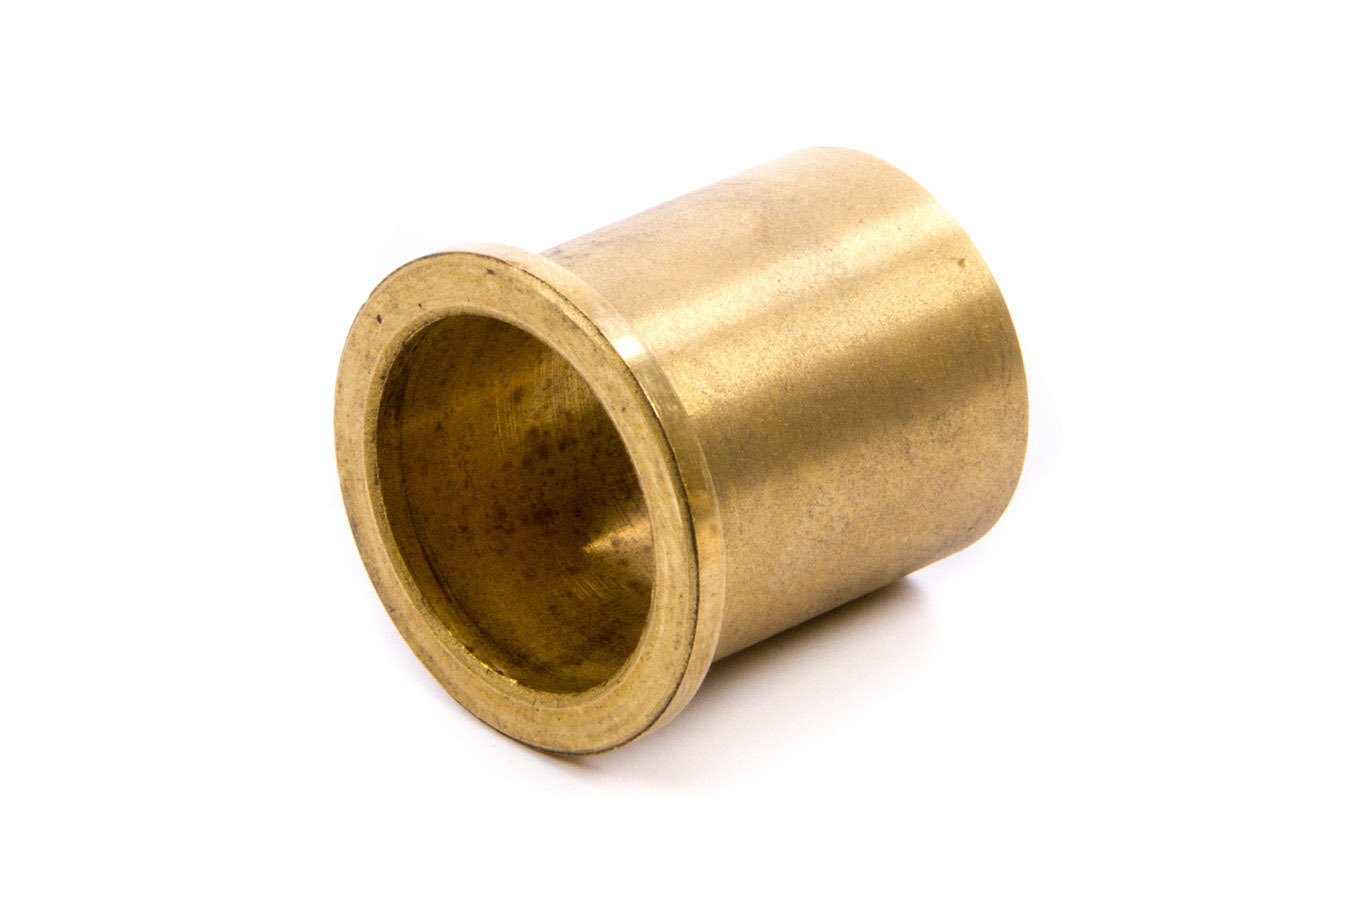 M&W Aluminum Products BB-120 Torsion Bar Bushing, Brass, Natural, 0.120 in Torsion Bars, Each